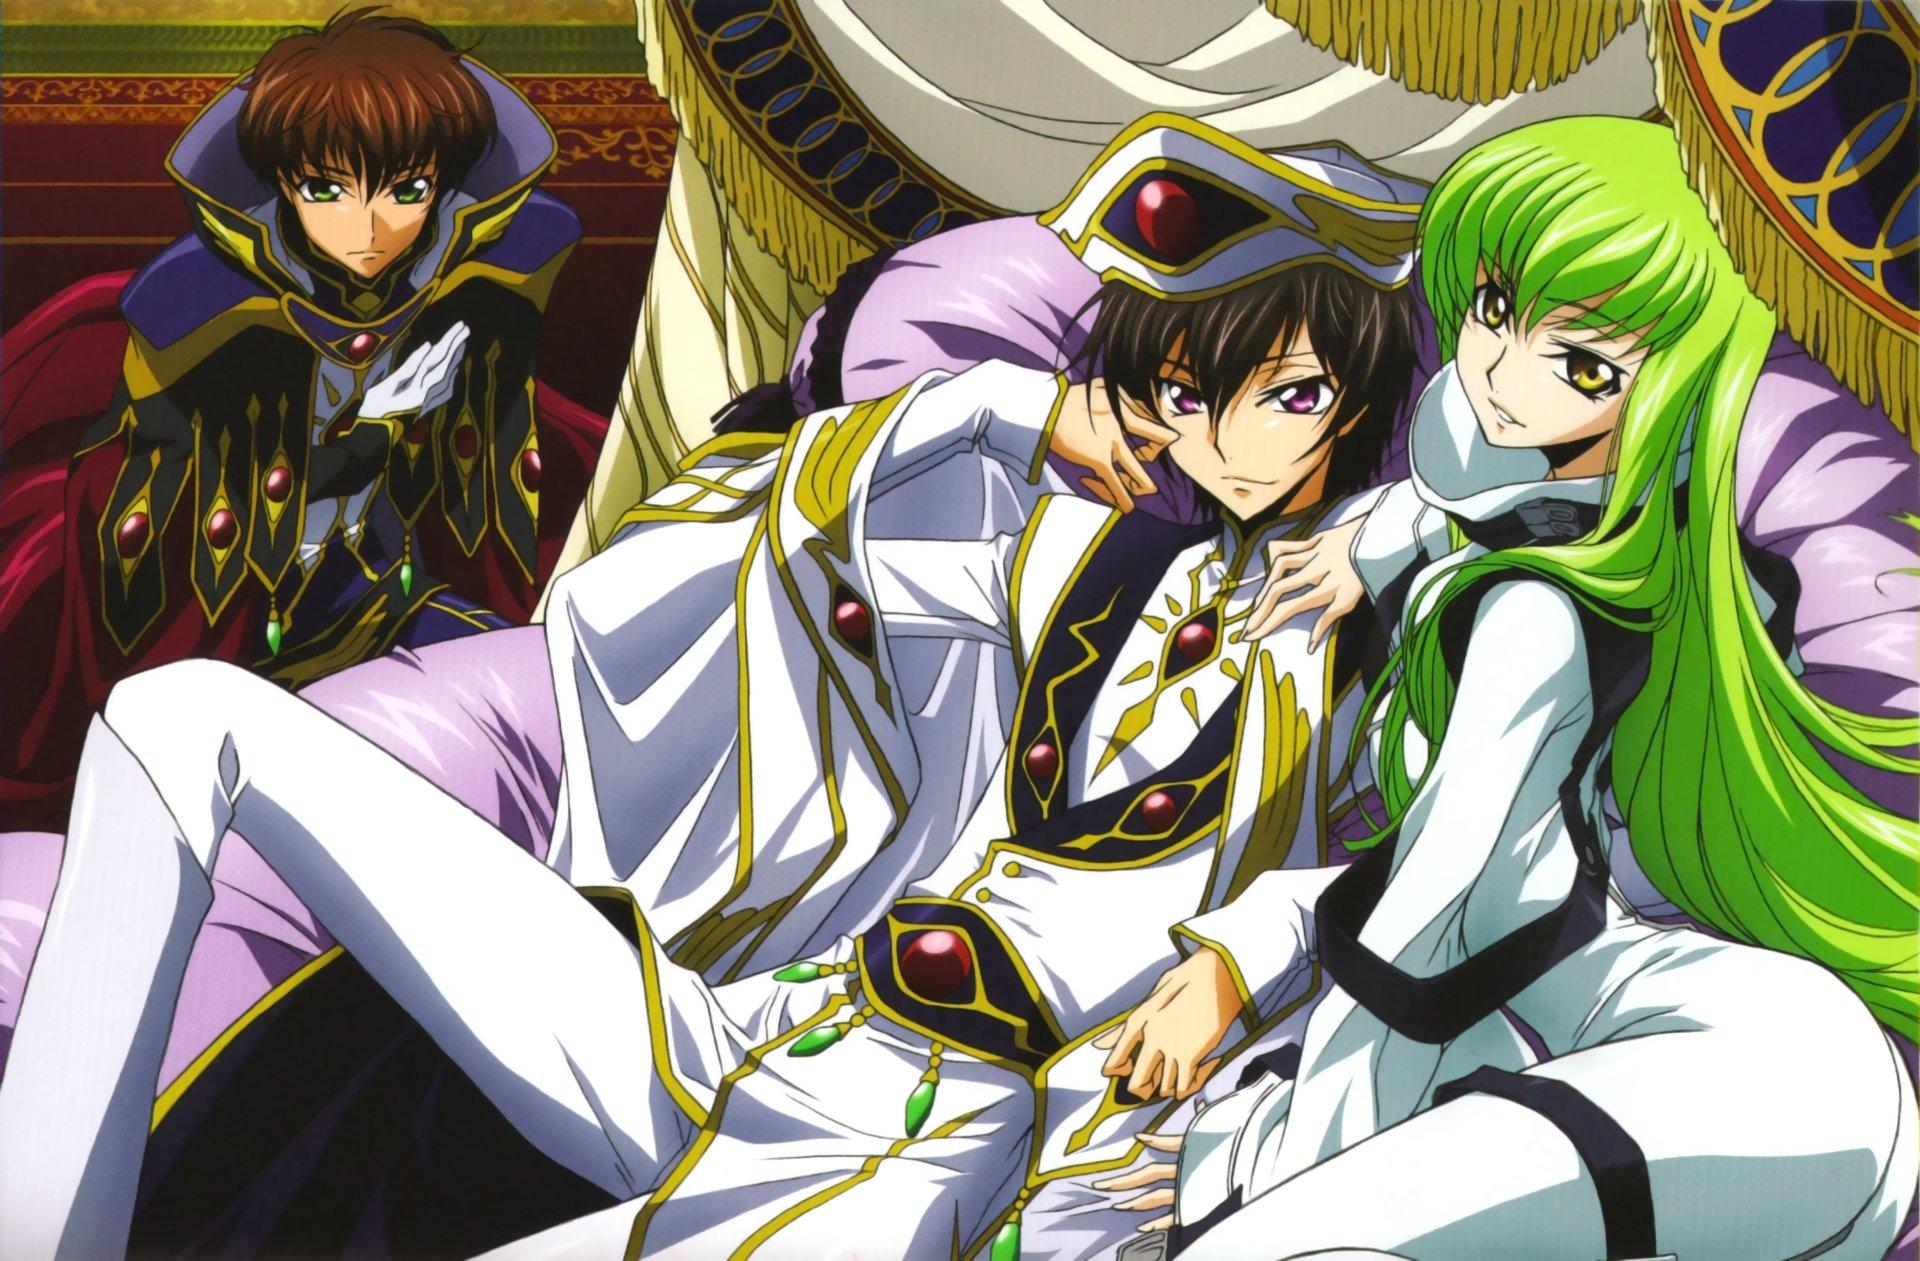 4K Ultra HD Code Geass Wallpaper and Background Image